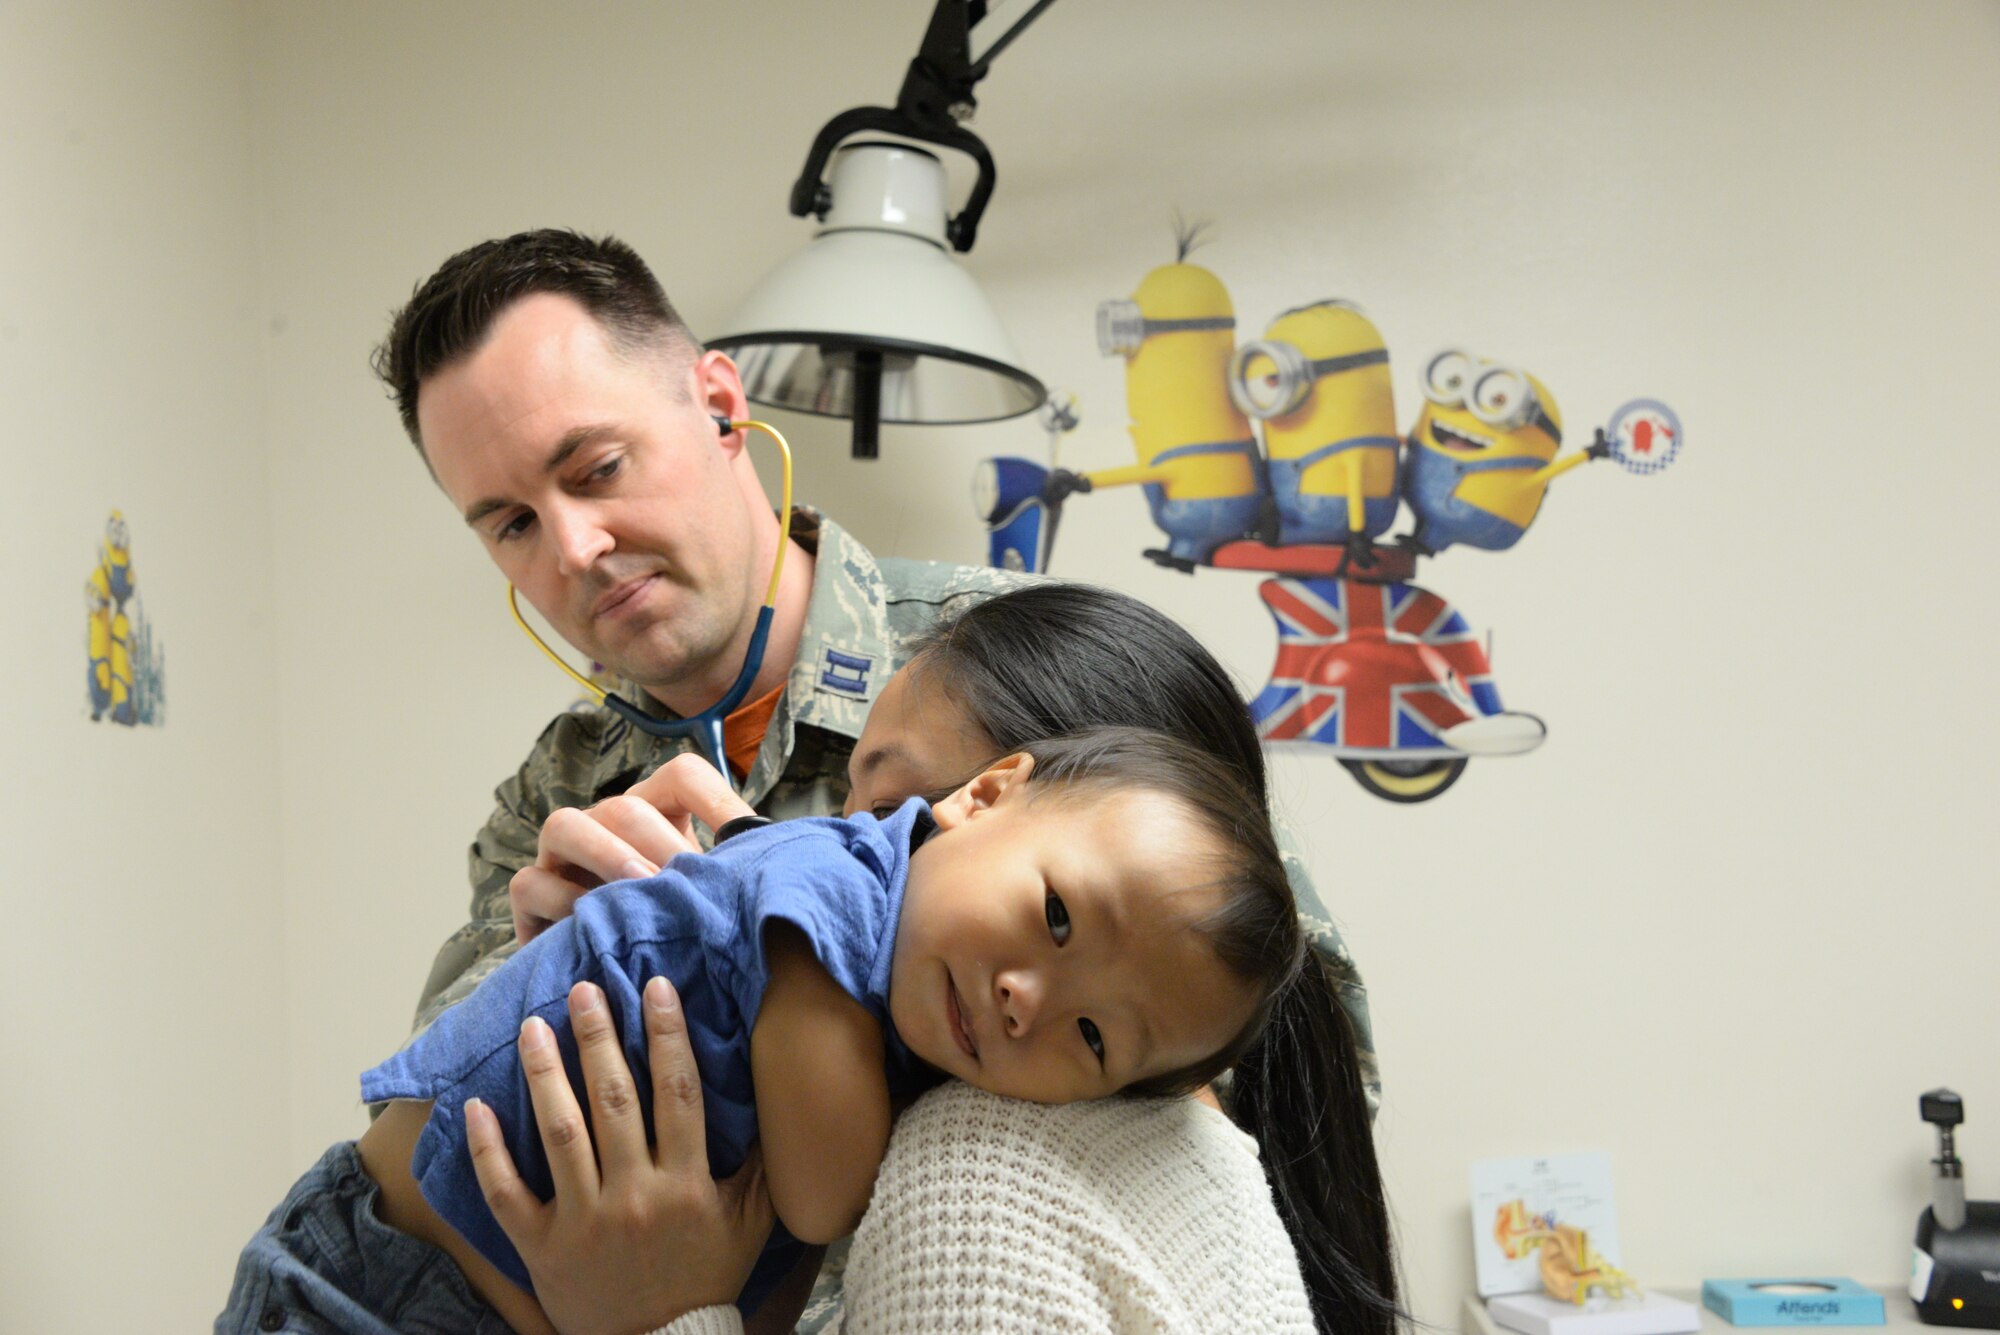 Levi, center, is held by his mother, Jolene Abaya, during a check-up March 30, 2018, with Capt. (Dr.) Steven Williams, 60th Medical Operations Squadron staff pediatrician, at the David Grant USAF Medical Center Pediatric Clinic at Travis Air Force Base, Calif. The Pediatric Clinic cares for 4,500 military children between the ages of newborn to 18 years old. (U.S. Air Force photo by Staff Sgt. Amber Carter).